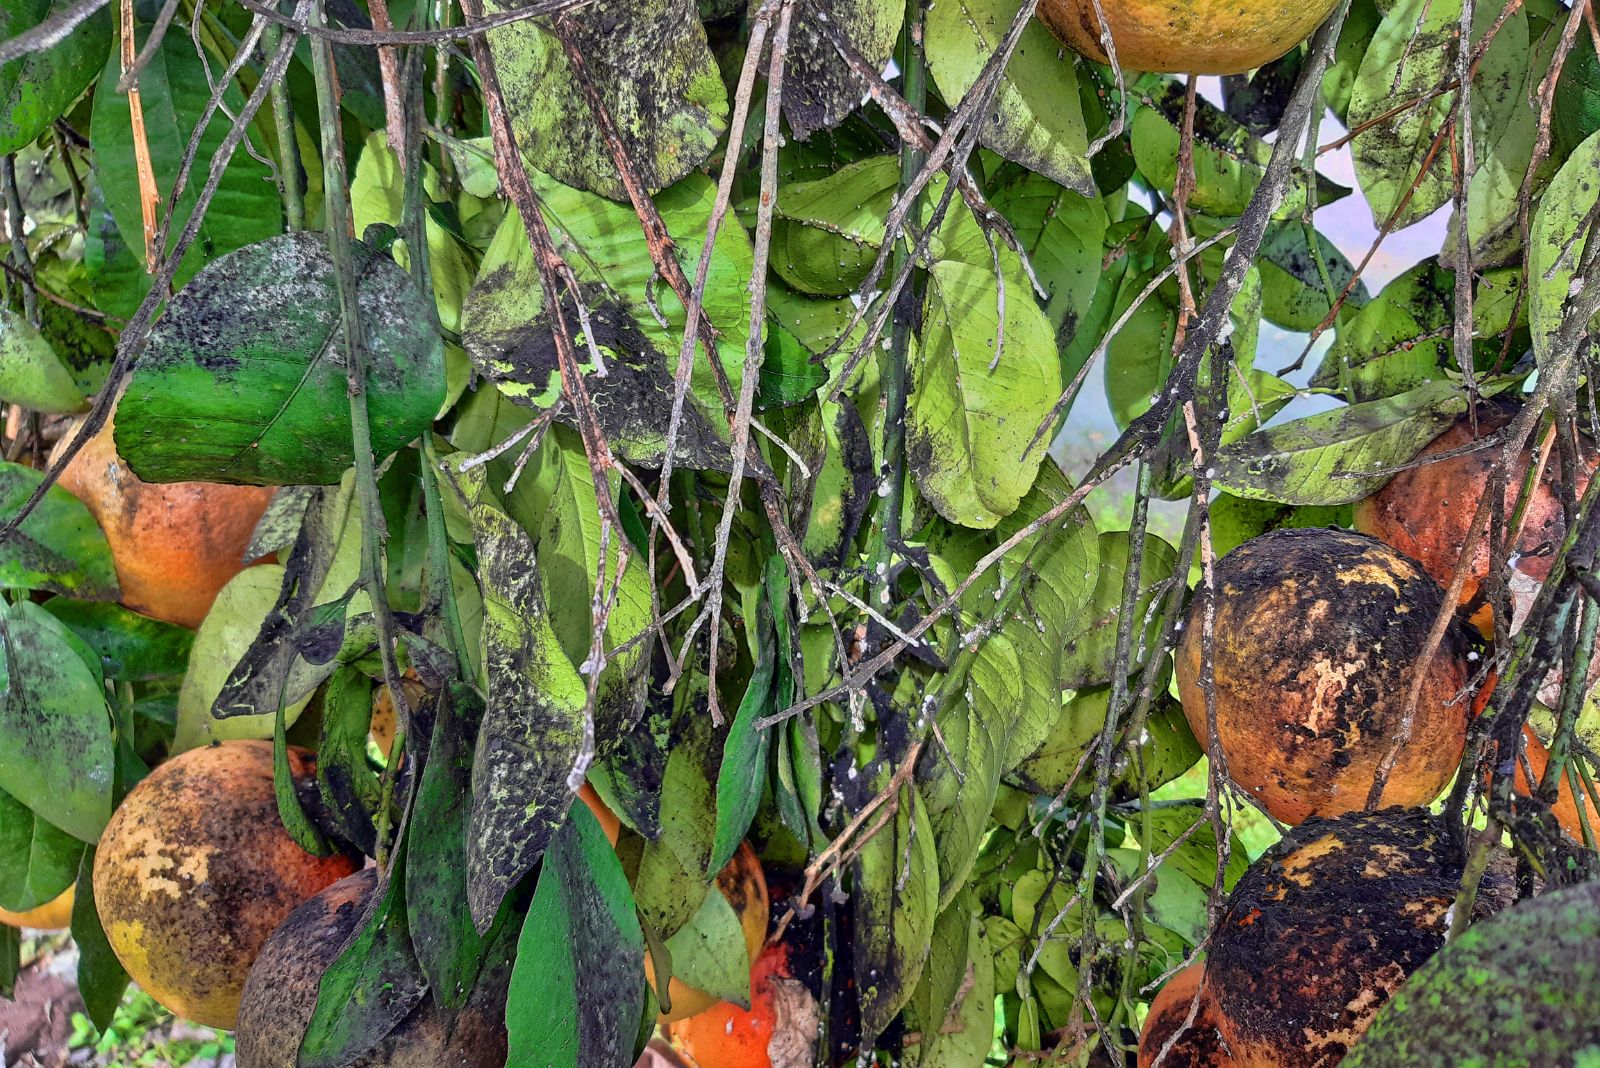 Ripe grapefruits and leaves with mold fungi